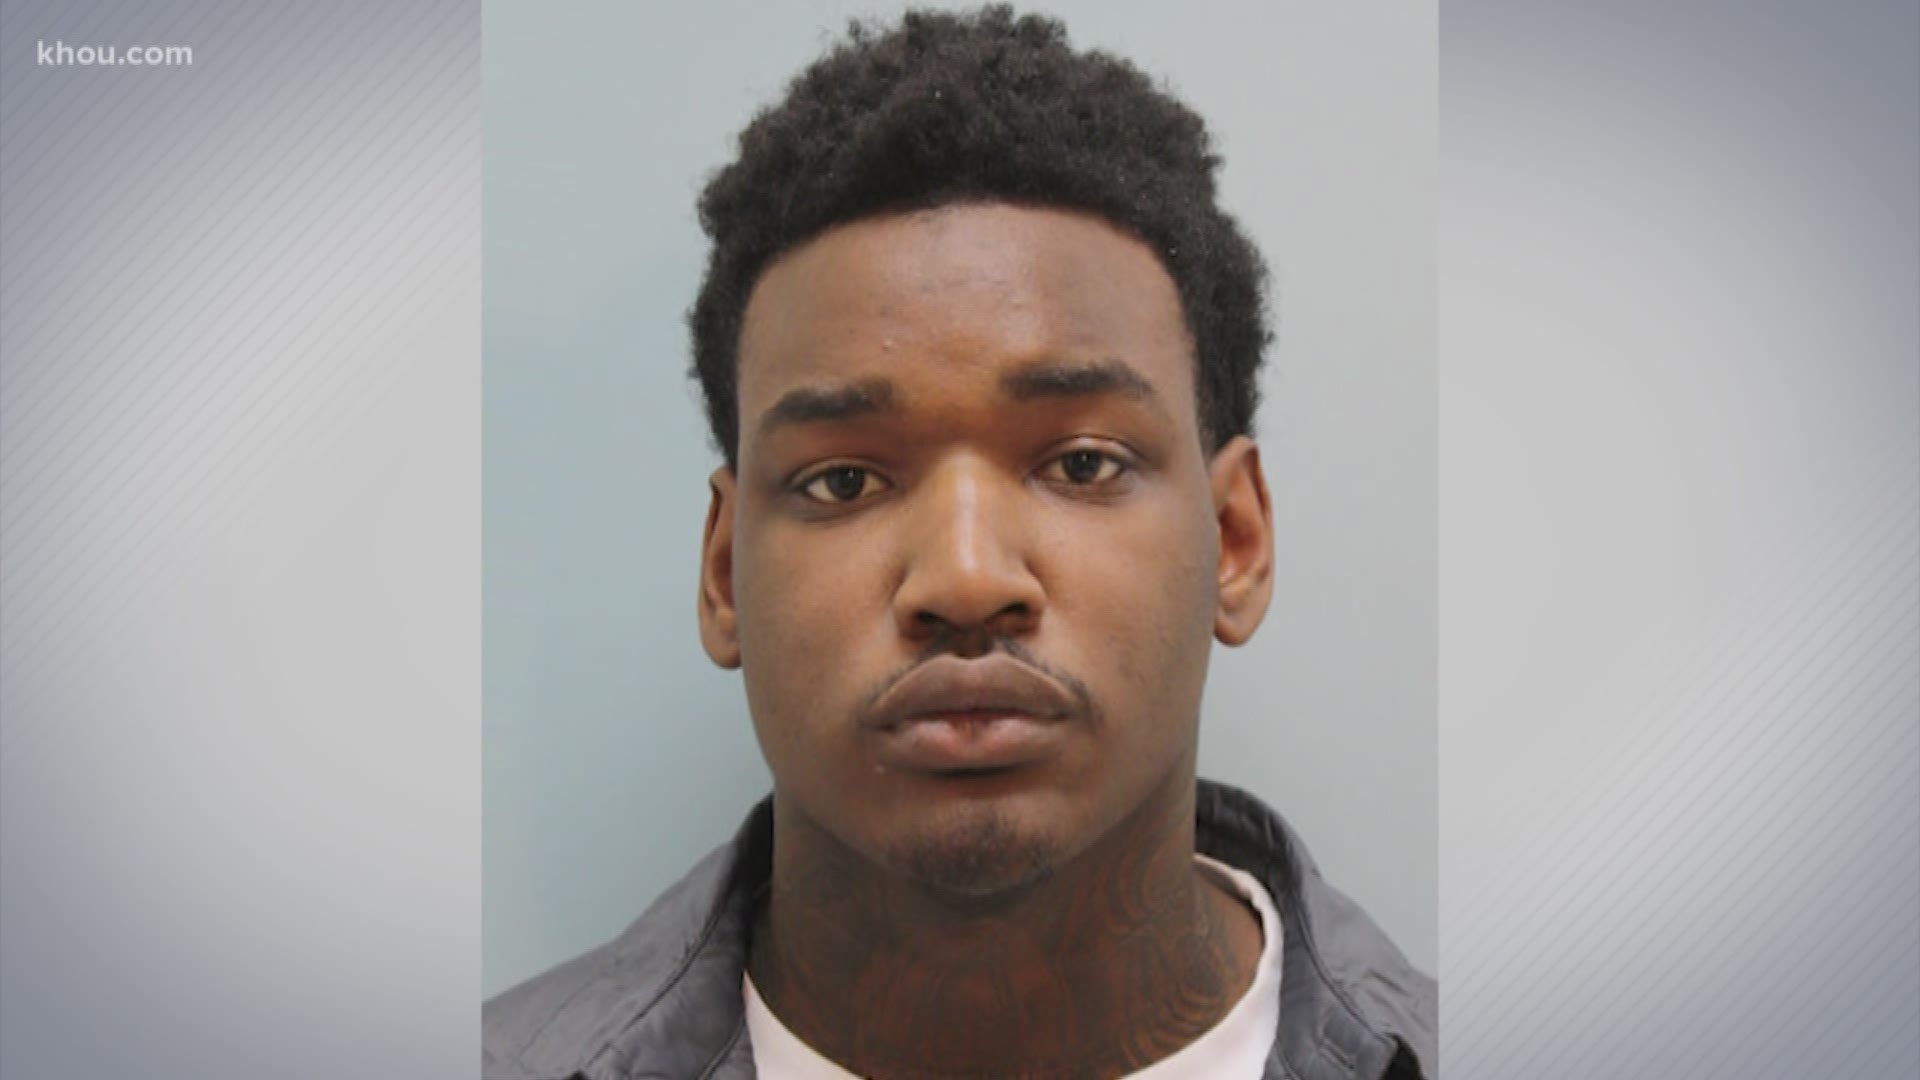 A suspect has been charged in the March 2019 murder of a convenience store clerk in northwest Harris County.